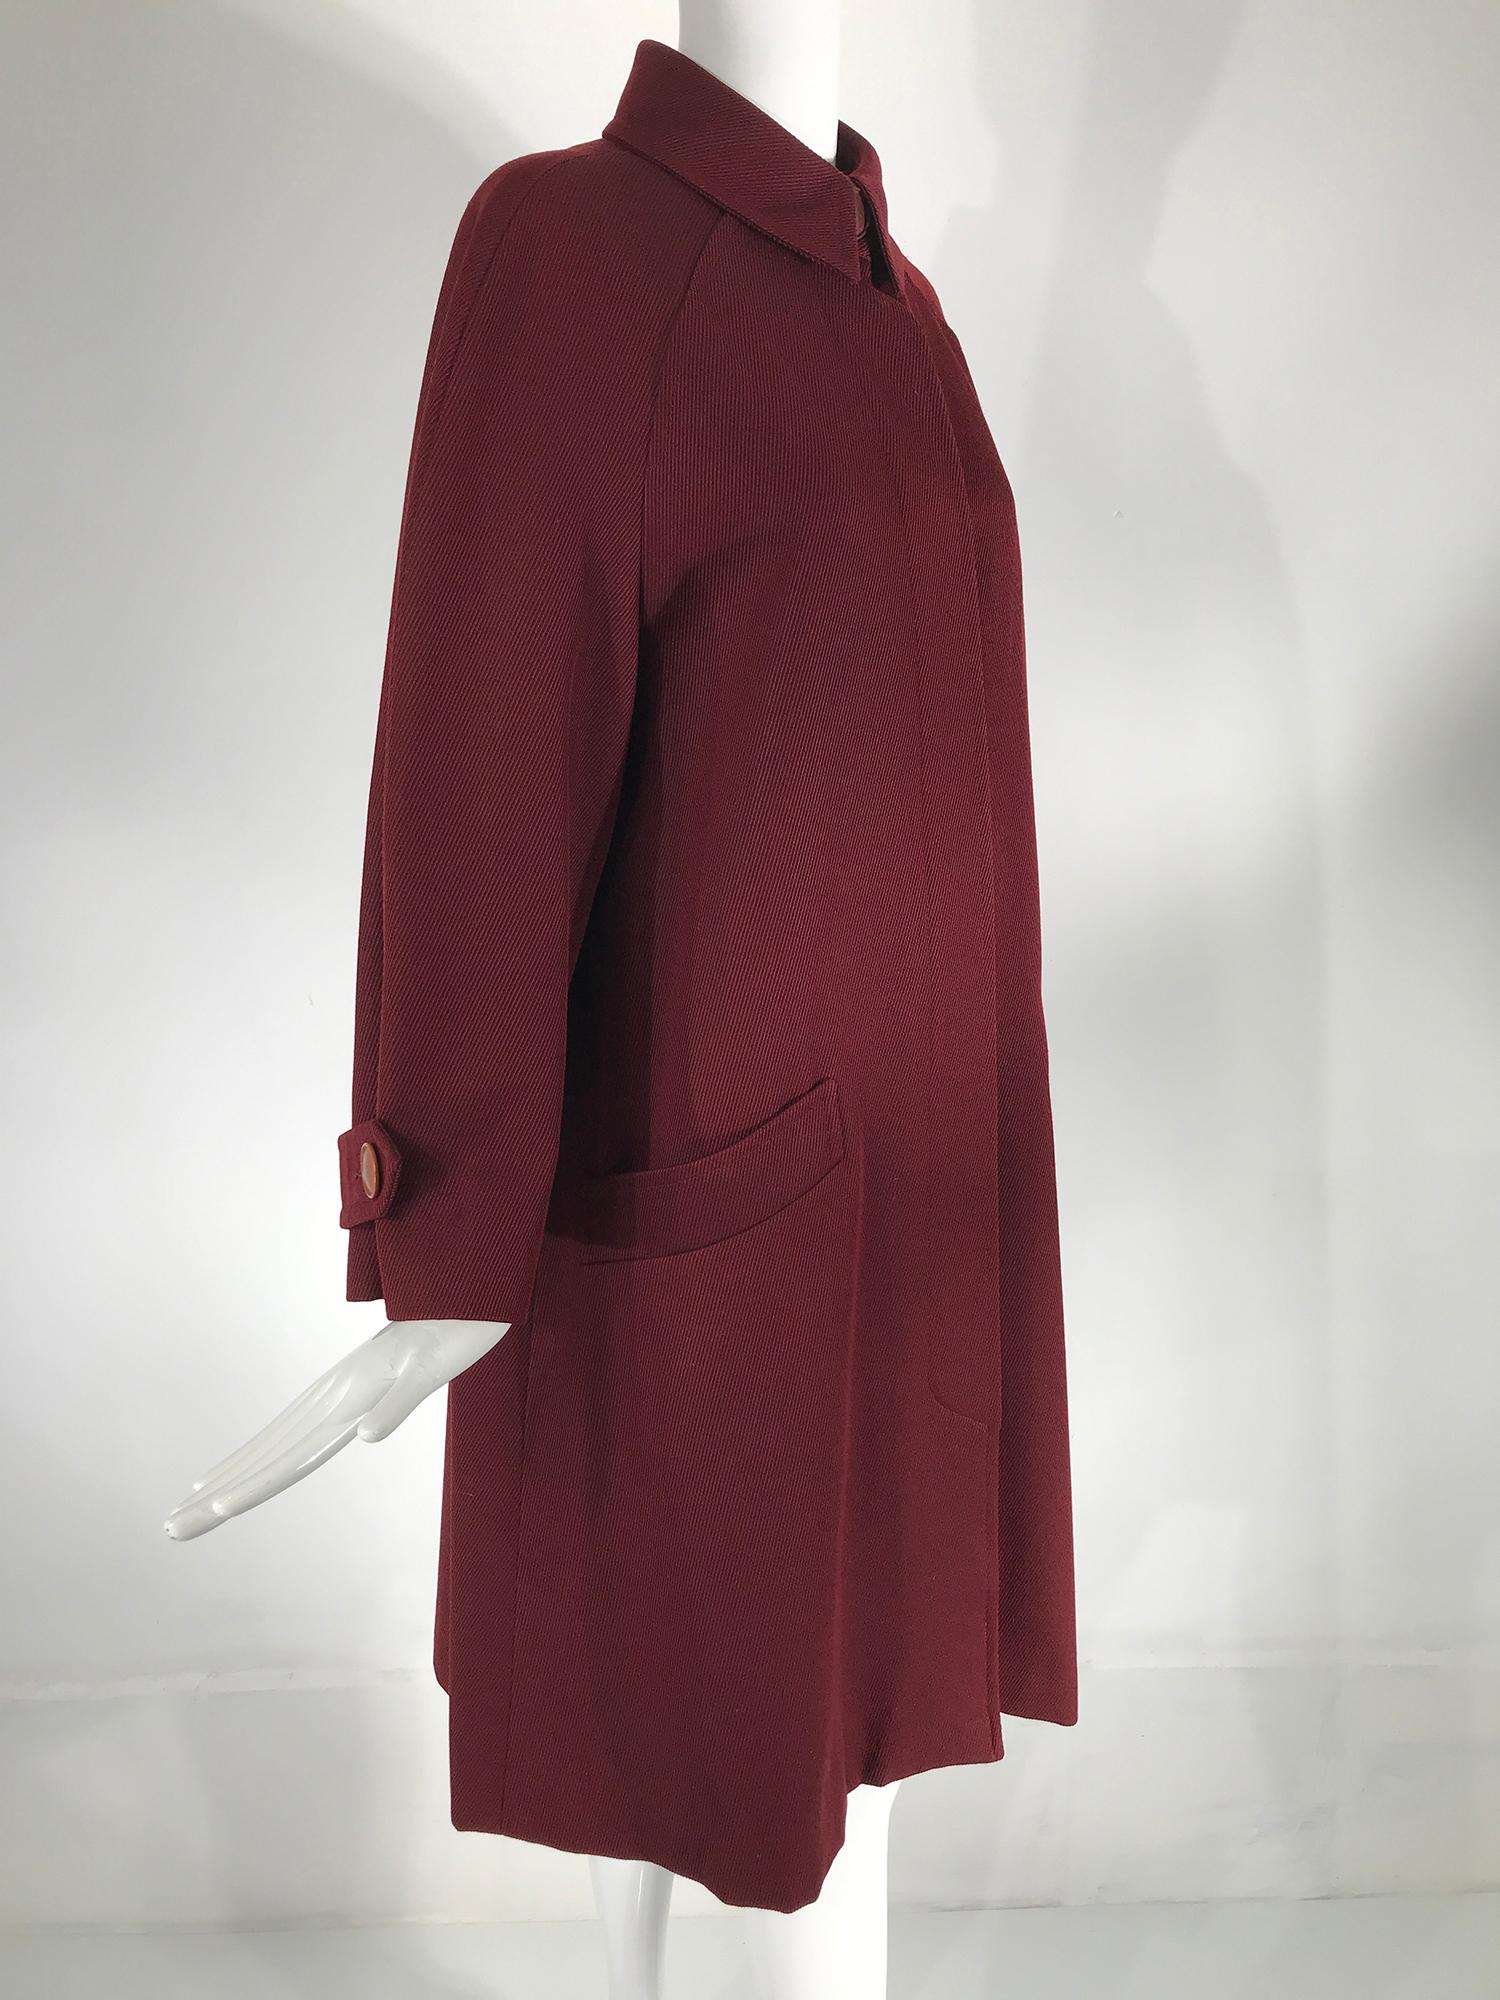 Hermes classic burgundy wool twill over coat a timeless addition to any wardrobe. Long raglan sleeve coat with Hermes logo button tab cuffs. Round collar with a logo button at the neck, hidden button placket front closure, with Hermes logo buttons.